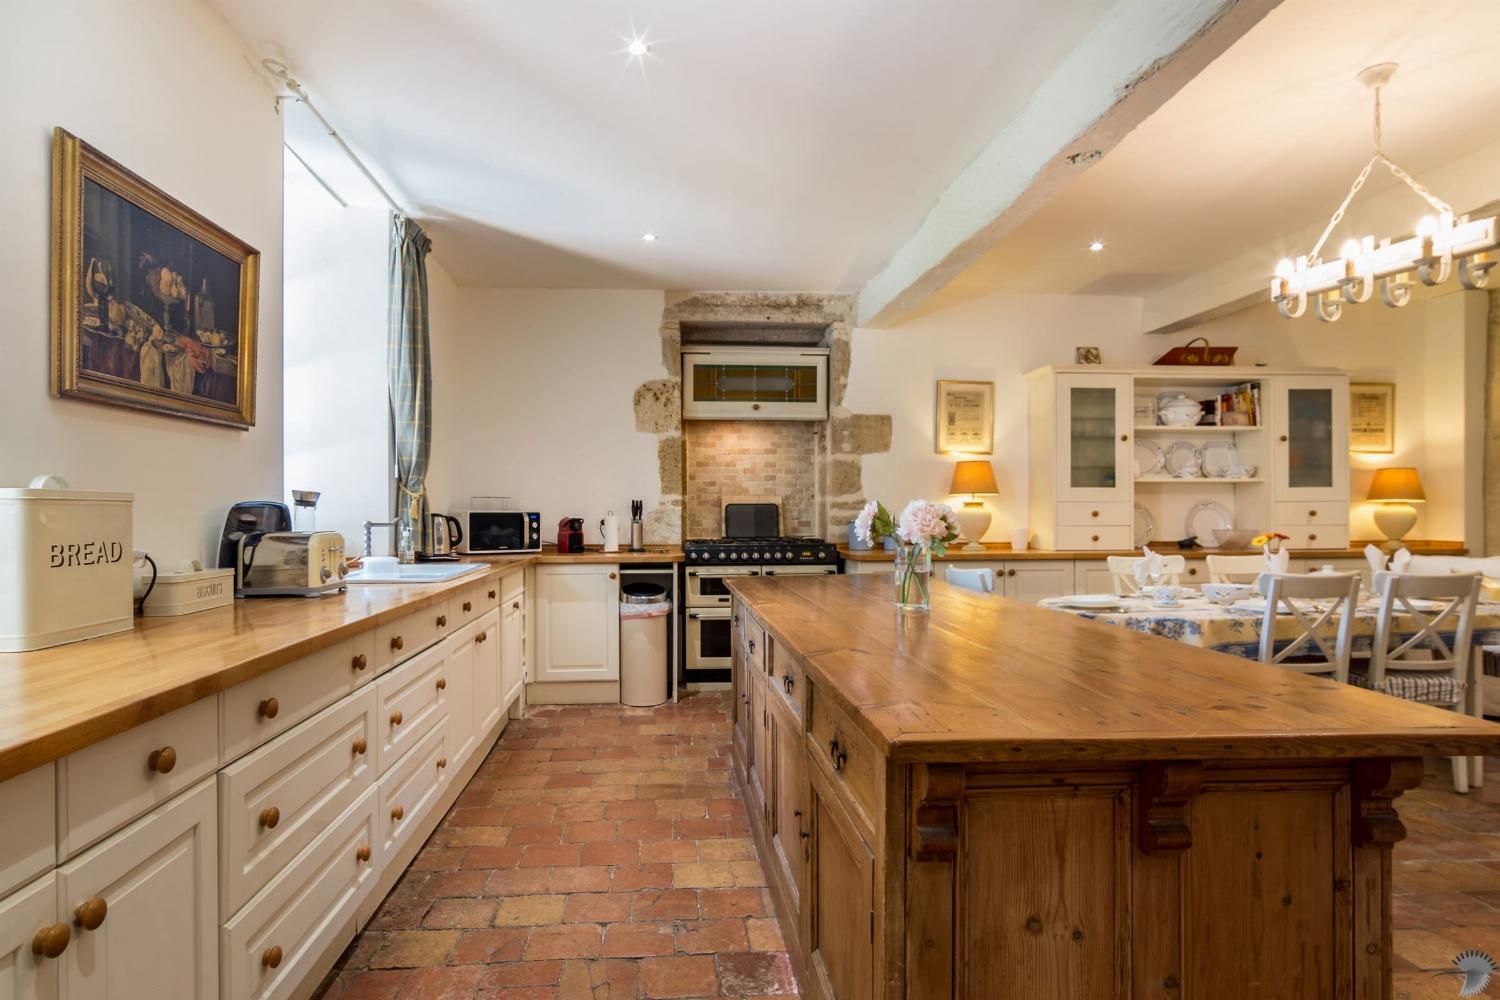 Kitchen | Holiday home in South West France